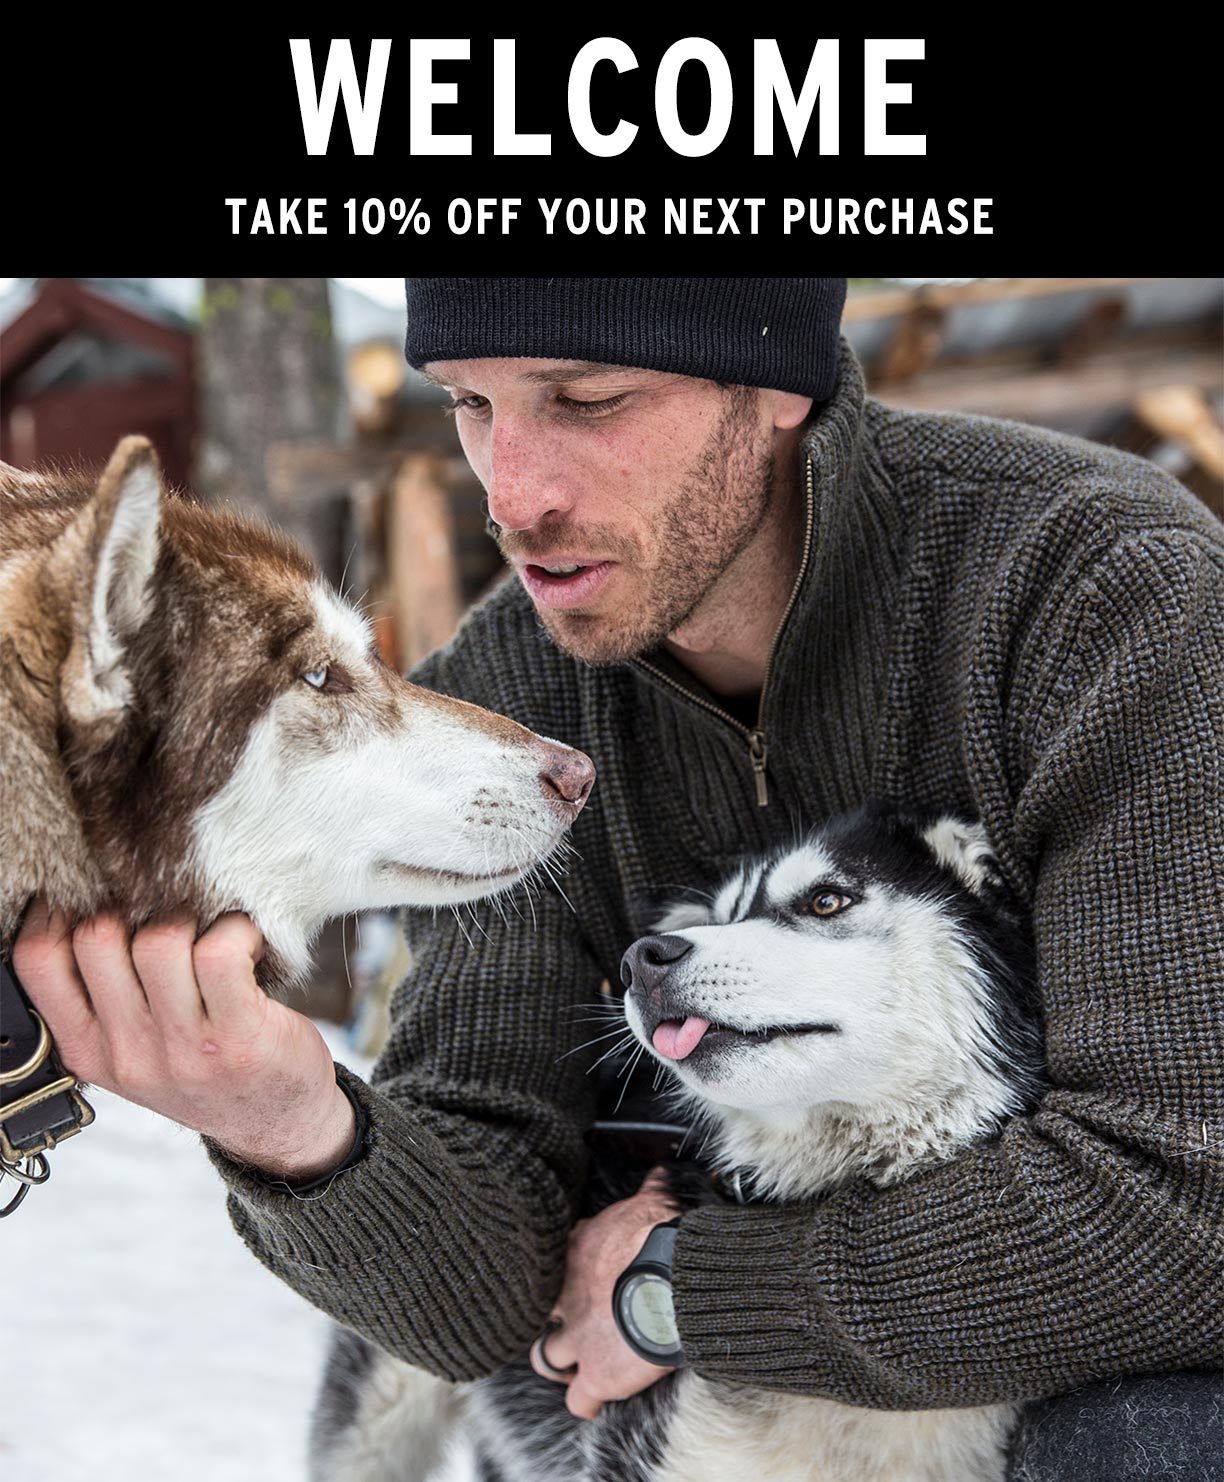 Welcome to the Filson family. Take 10% Off Your Next Purchase.